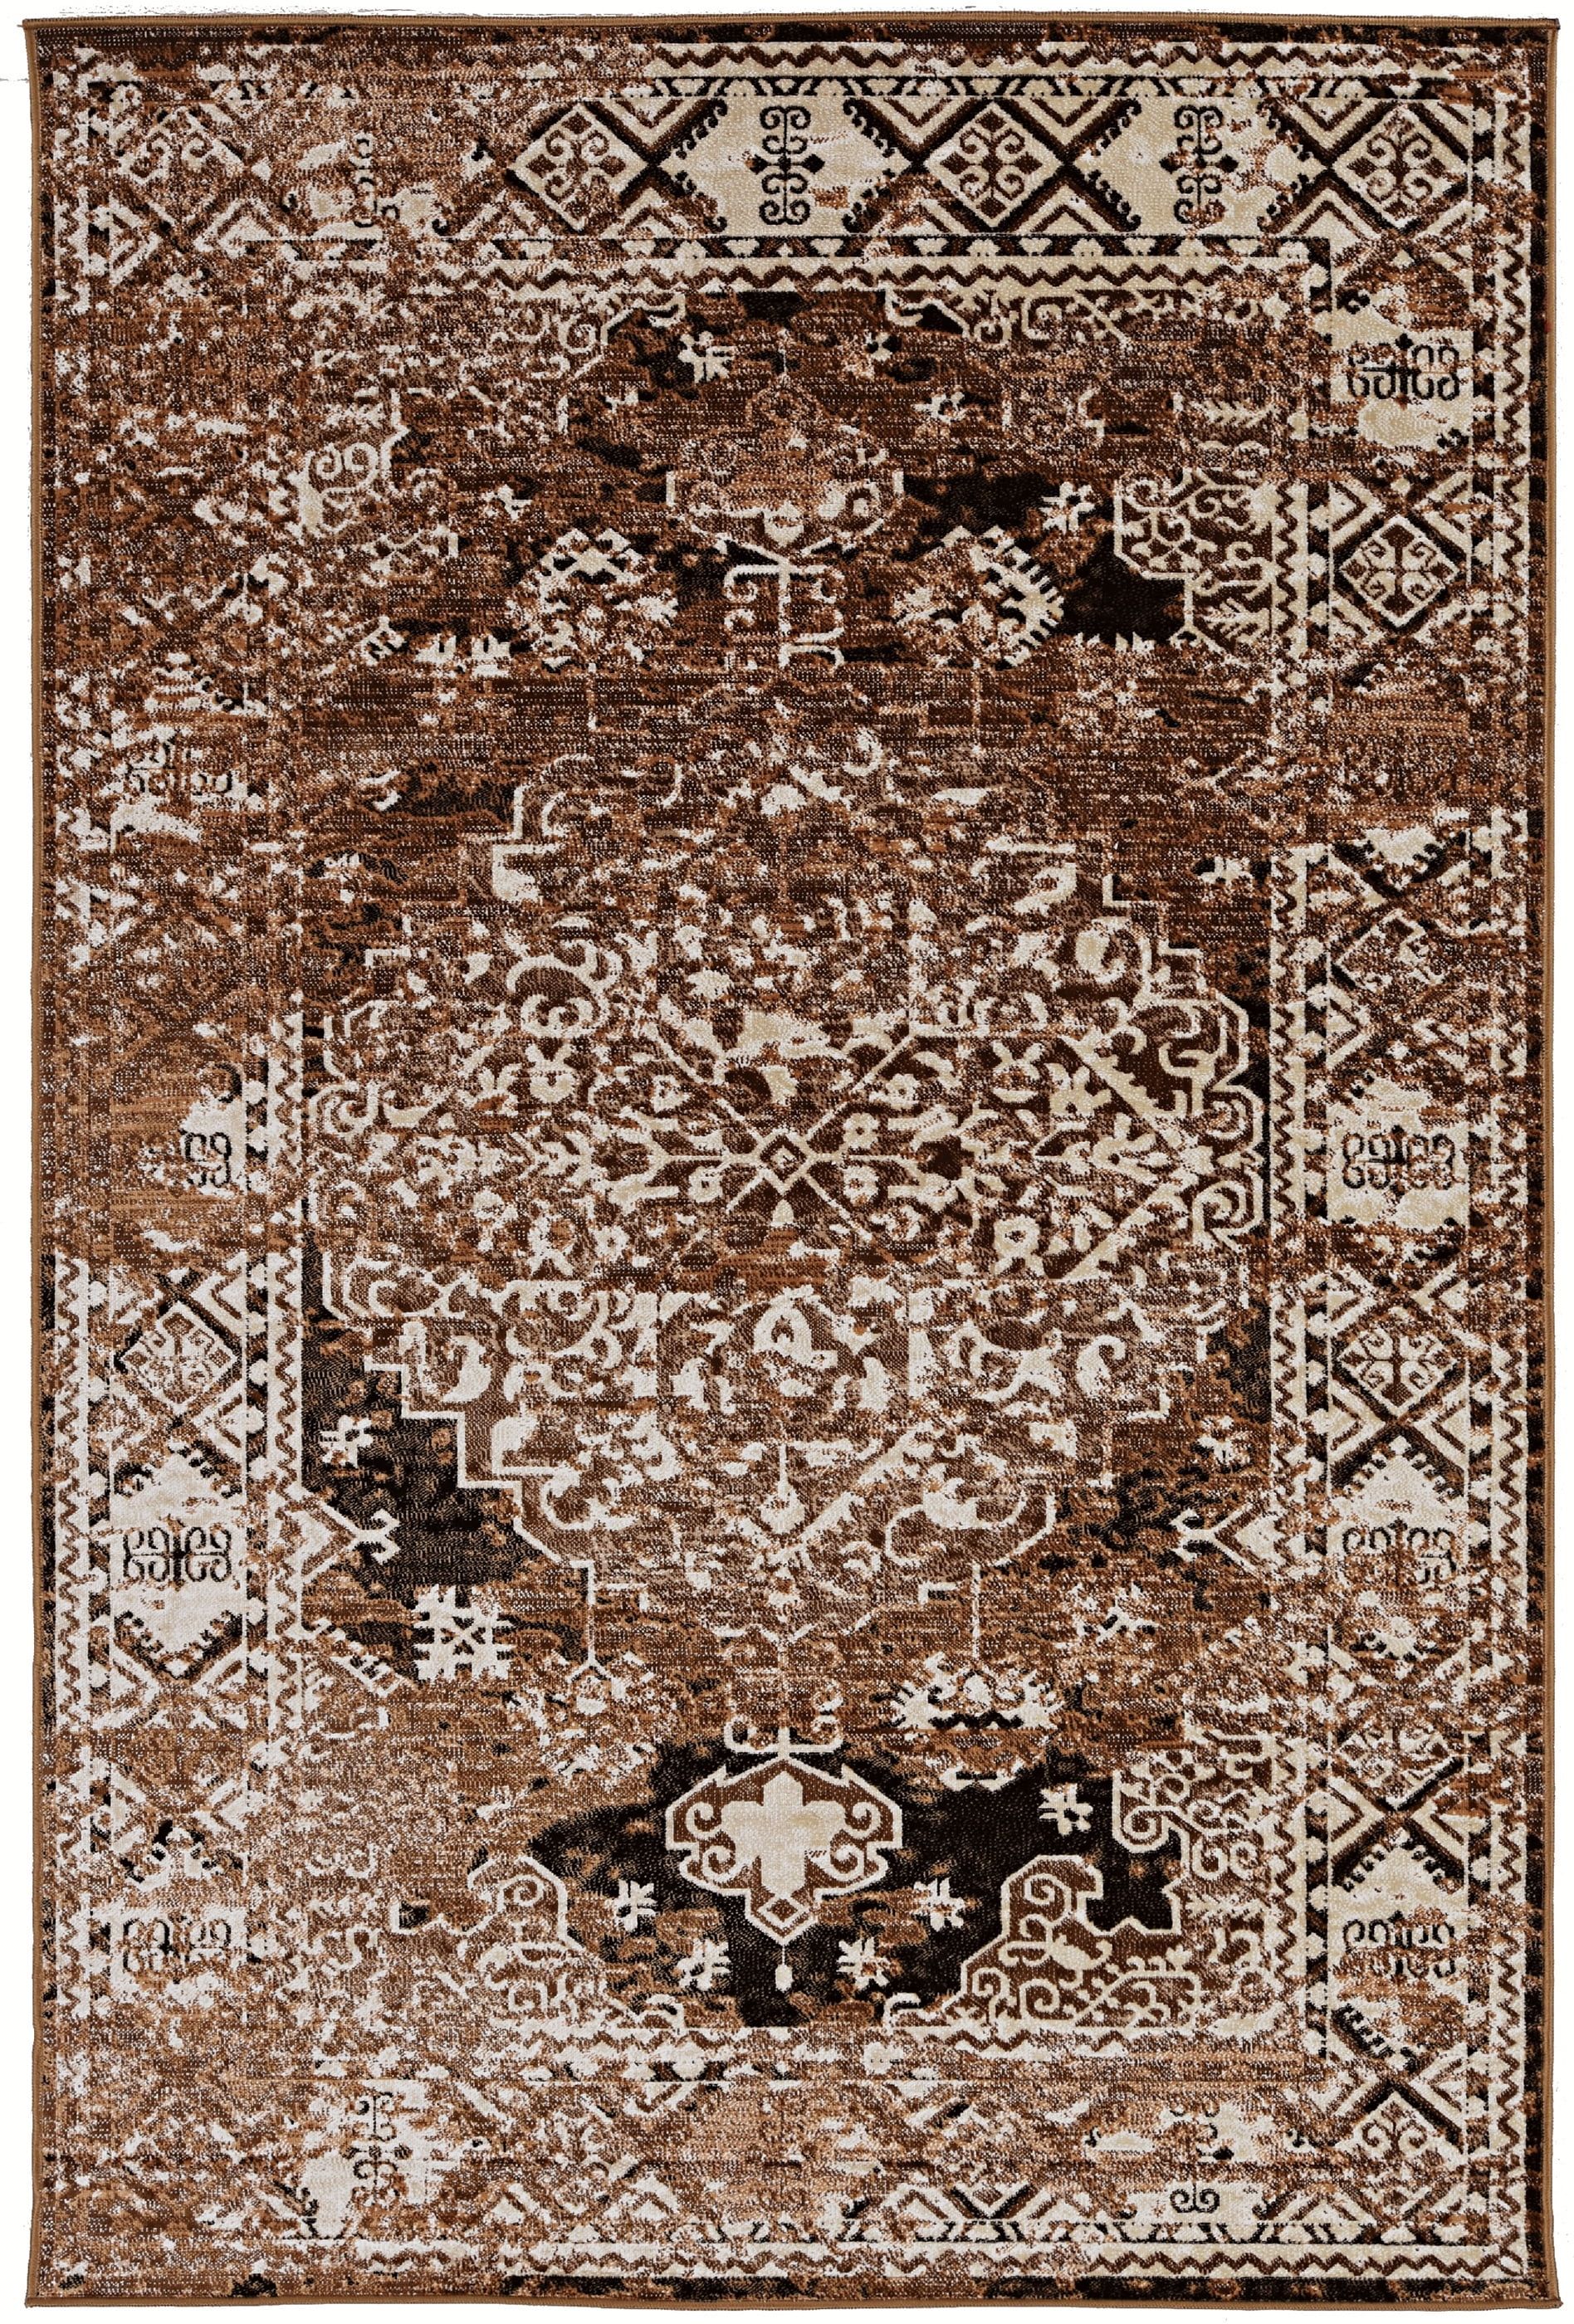 Linon Home DÃ©cor Vintage Area Rug or Runner Collection, Beige and Brown, 5' x 7.6' | Walmart (US)